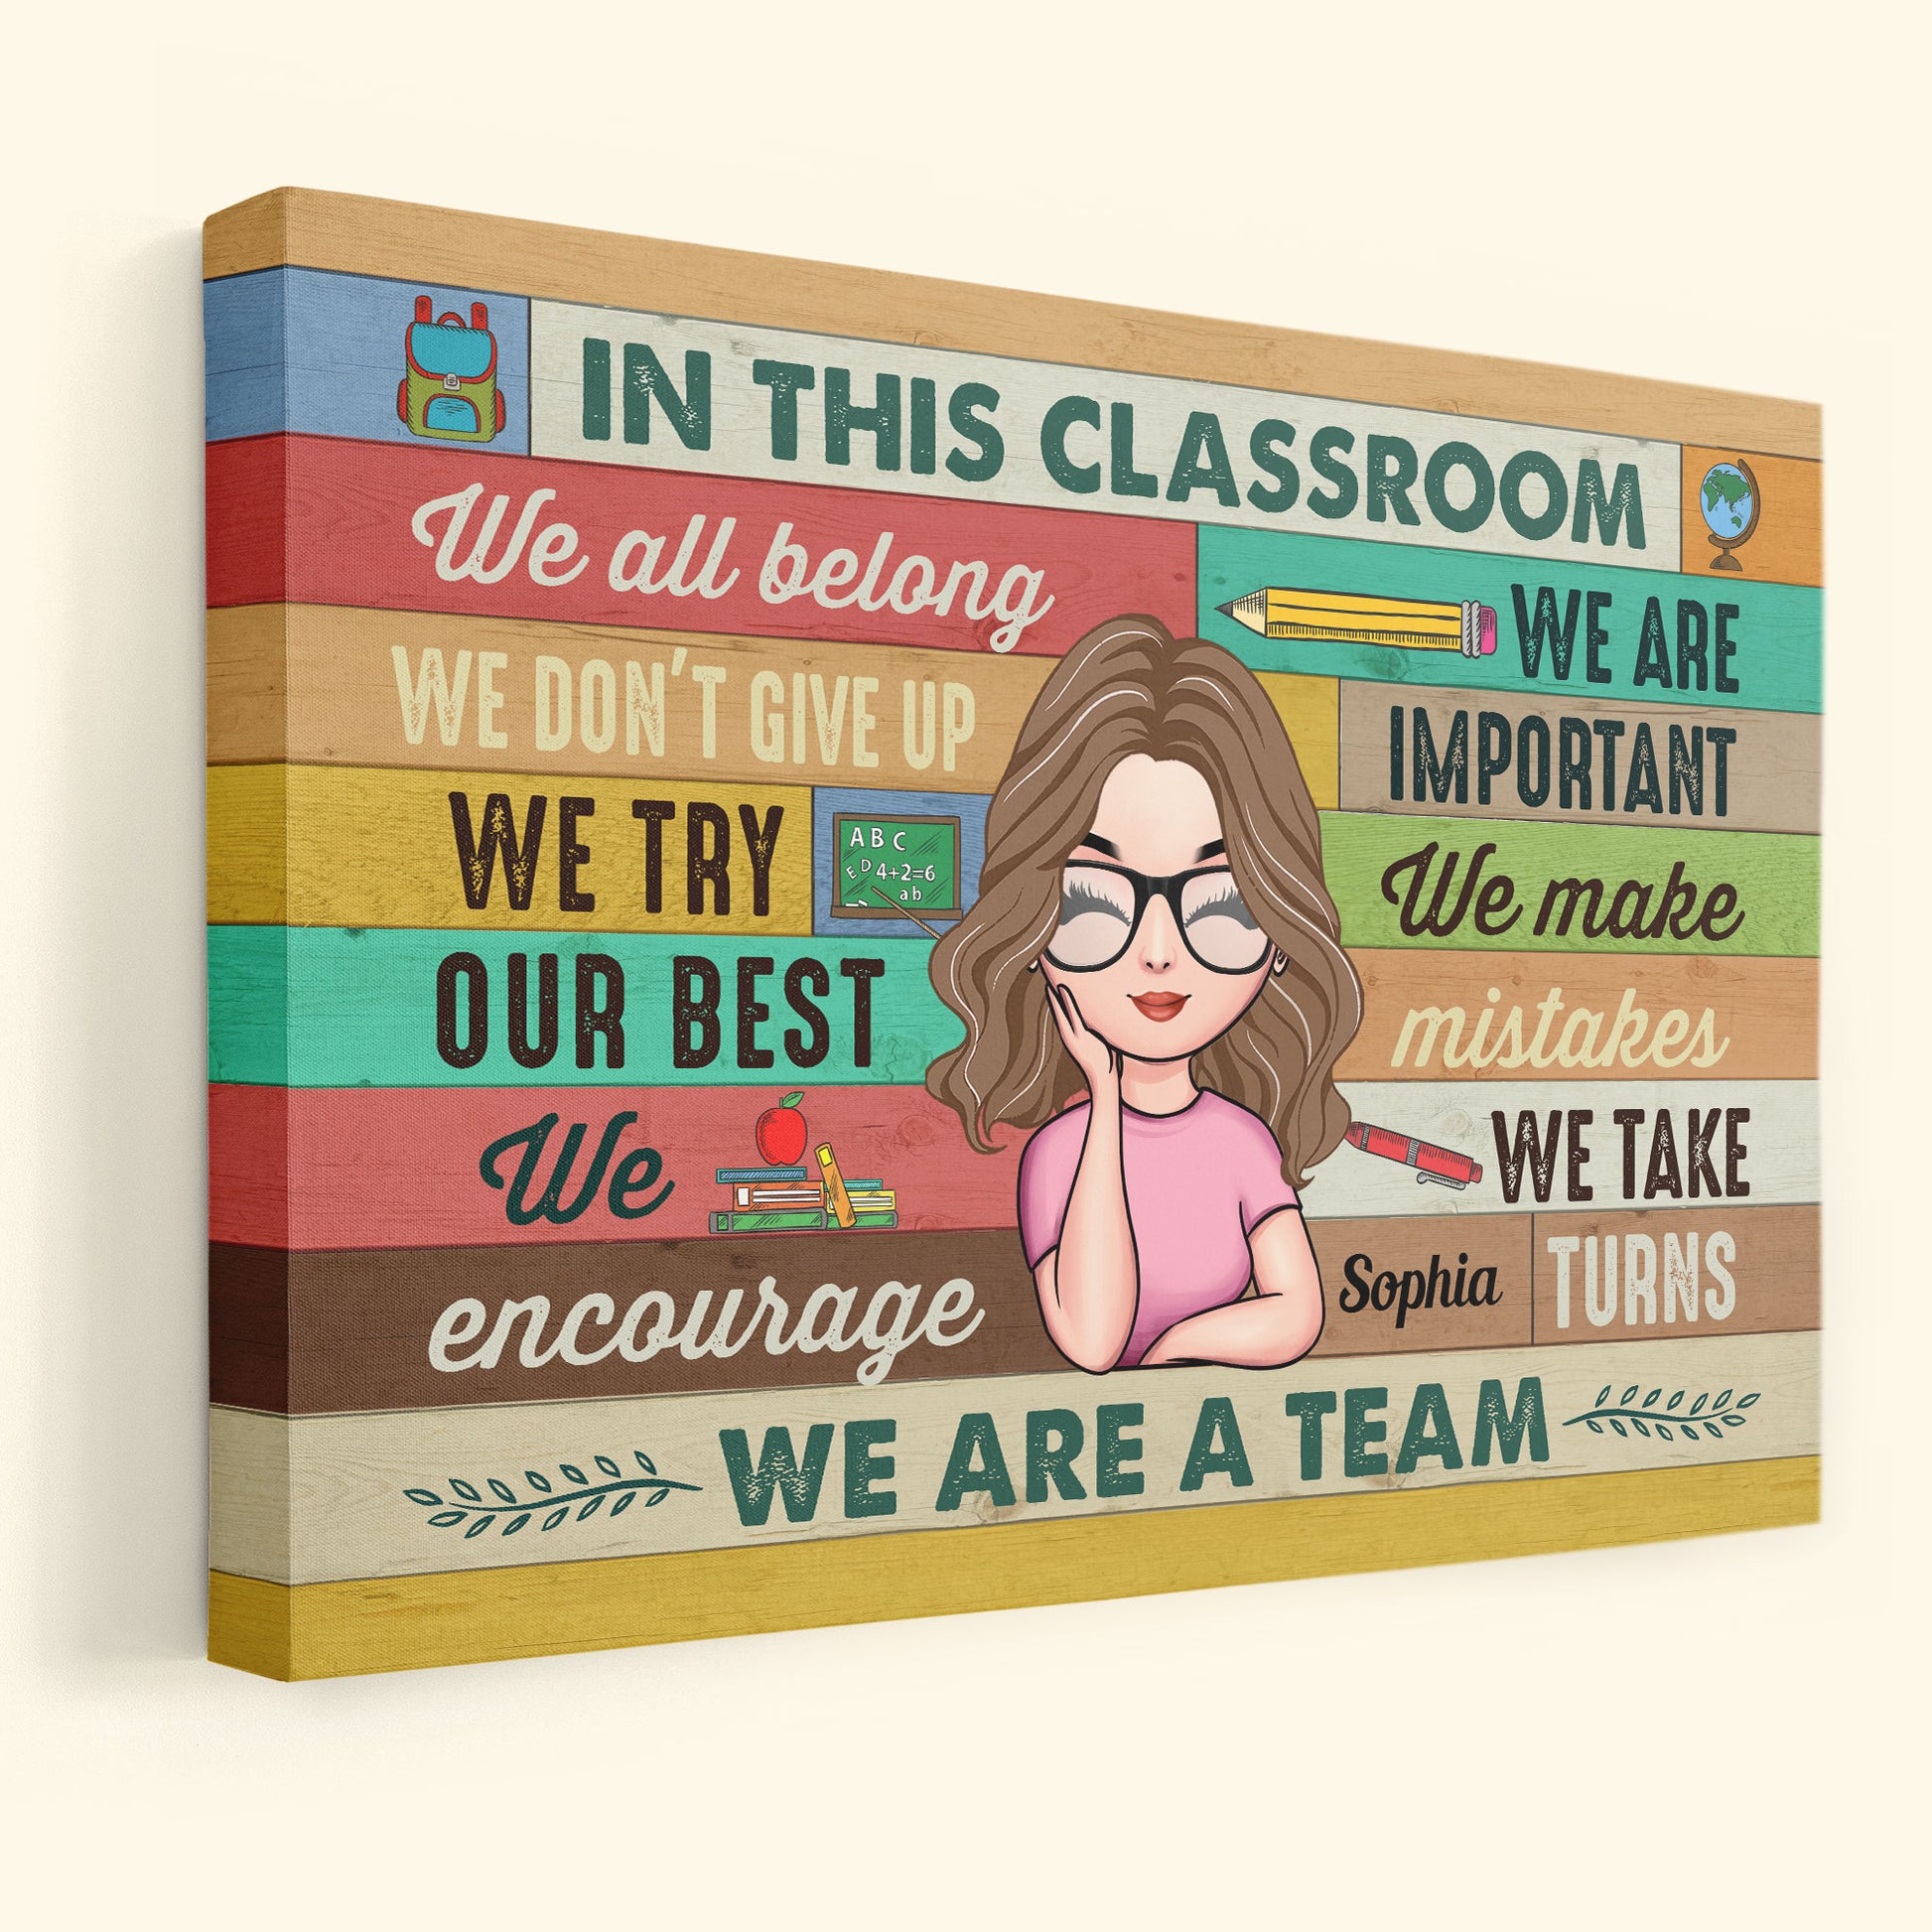 In This Classroom - Personalized Poster/Canvas - BirthdayGift For Teachers, Classrooms, School, Students